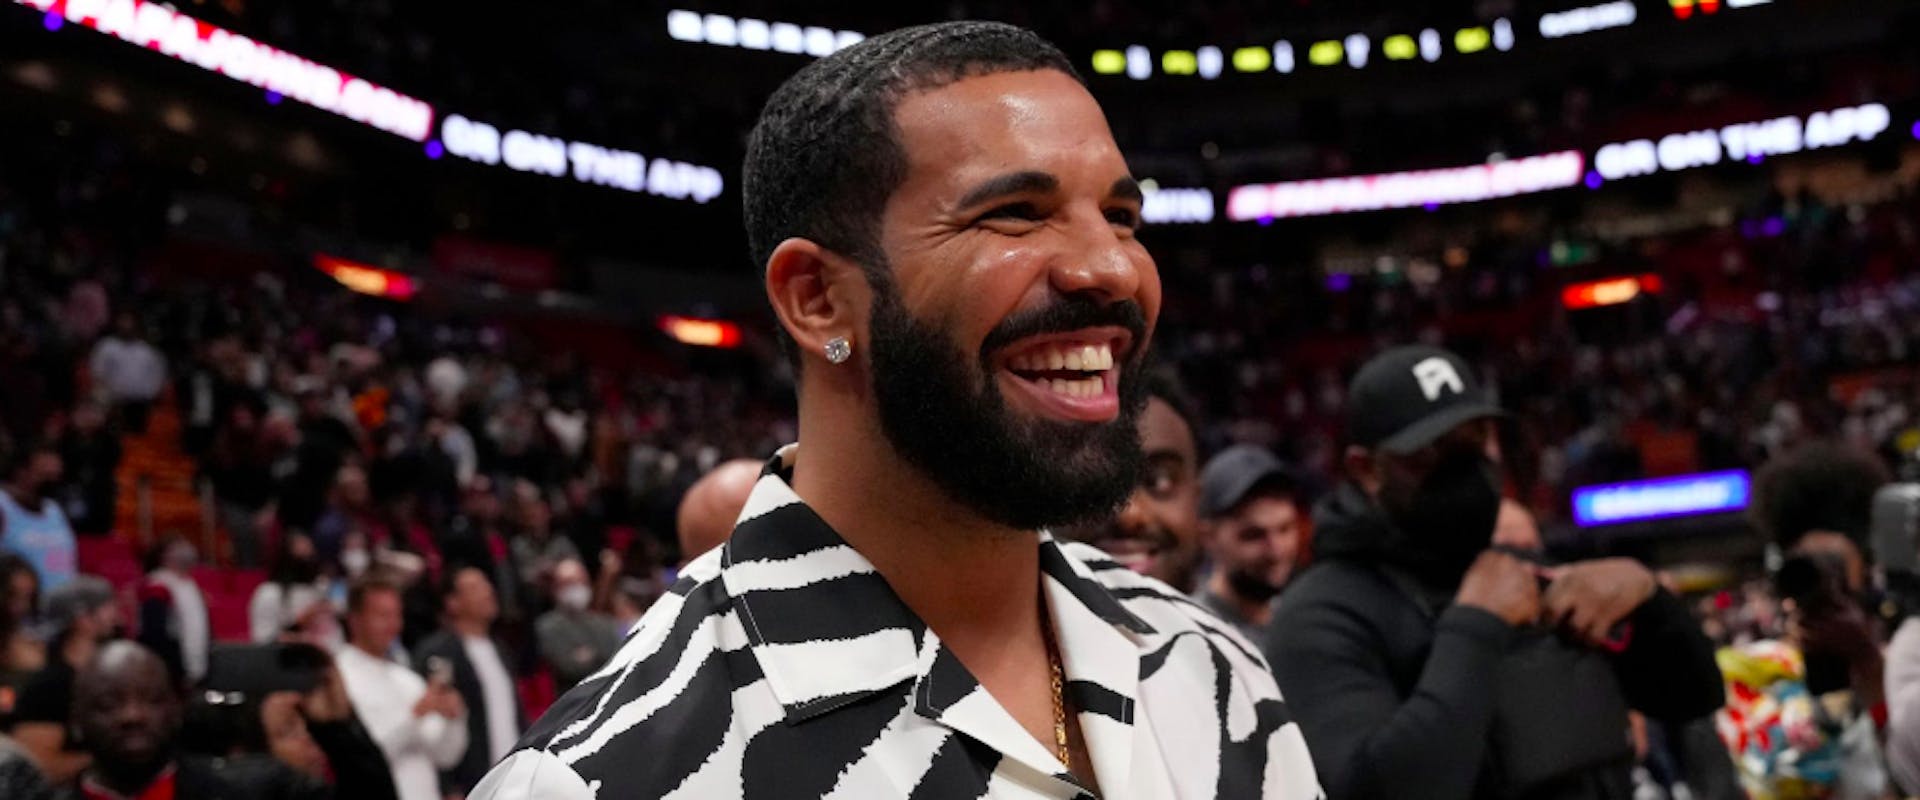 MIAMI, FLORIDA - JANUARY 14: Drake reacts after attending the game between the Miami Heat and the Atlanta Hawks at FTX Arena on January 14, 2022 in Miami, Florida.